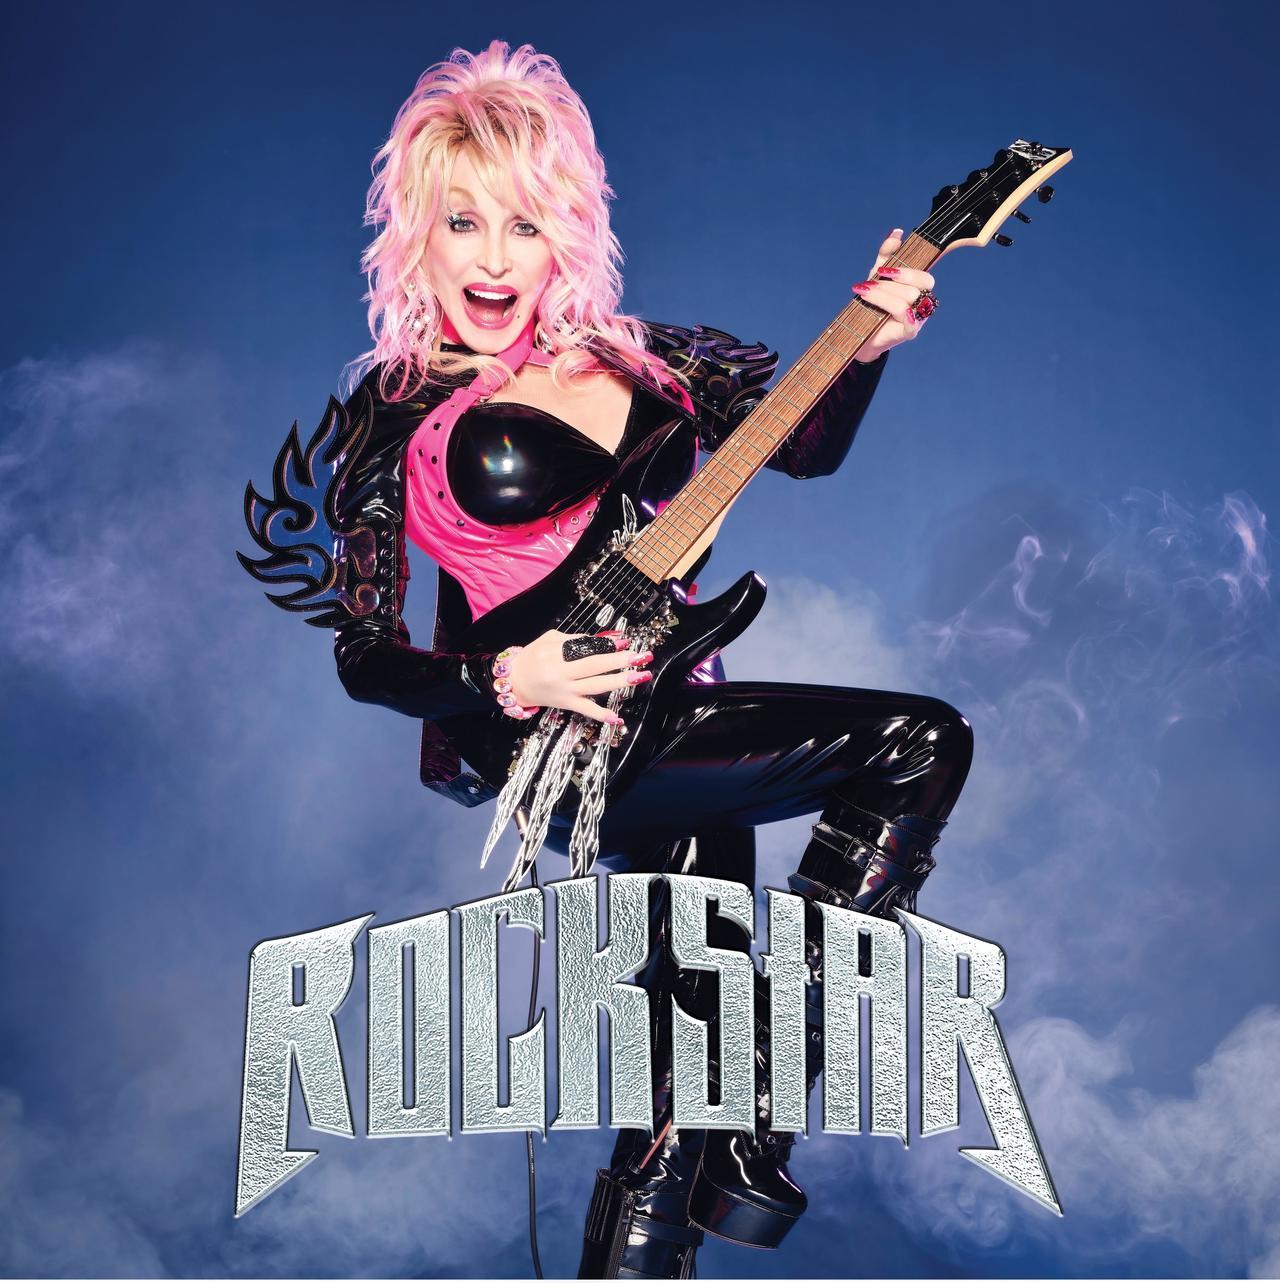 Dolly Parton's Highly Anticipated ROCKSTAR Album Available Now Worldwide